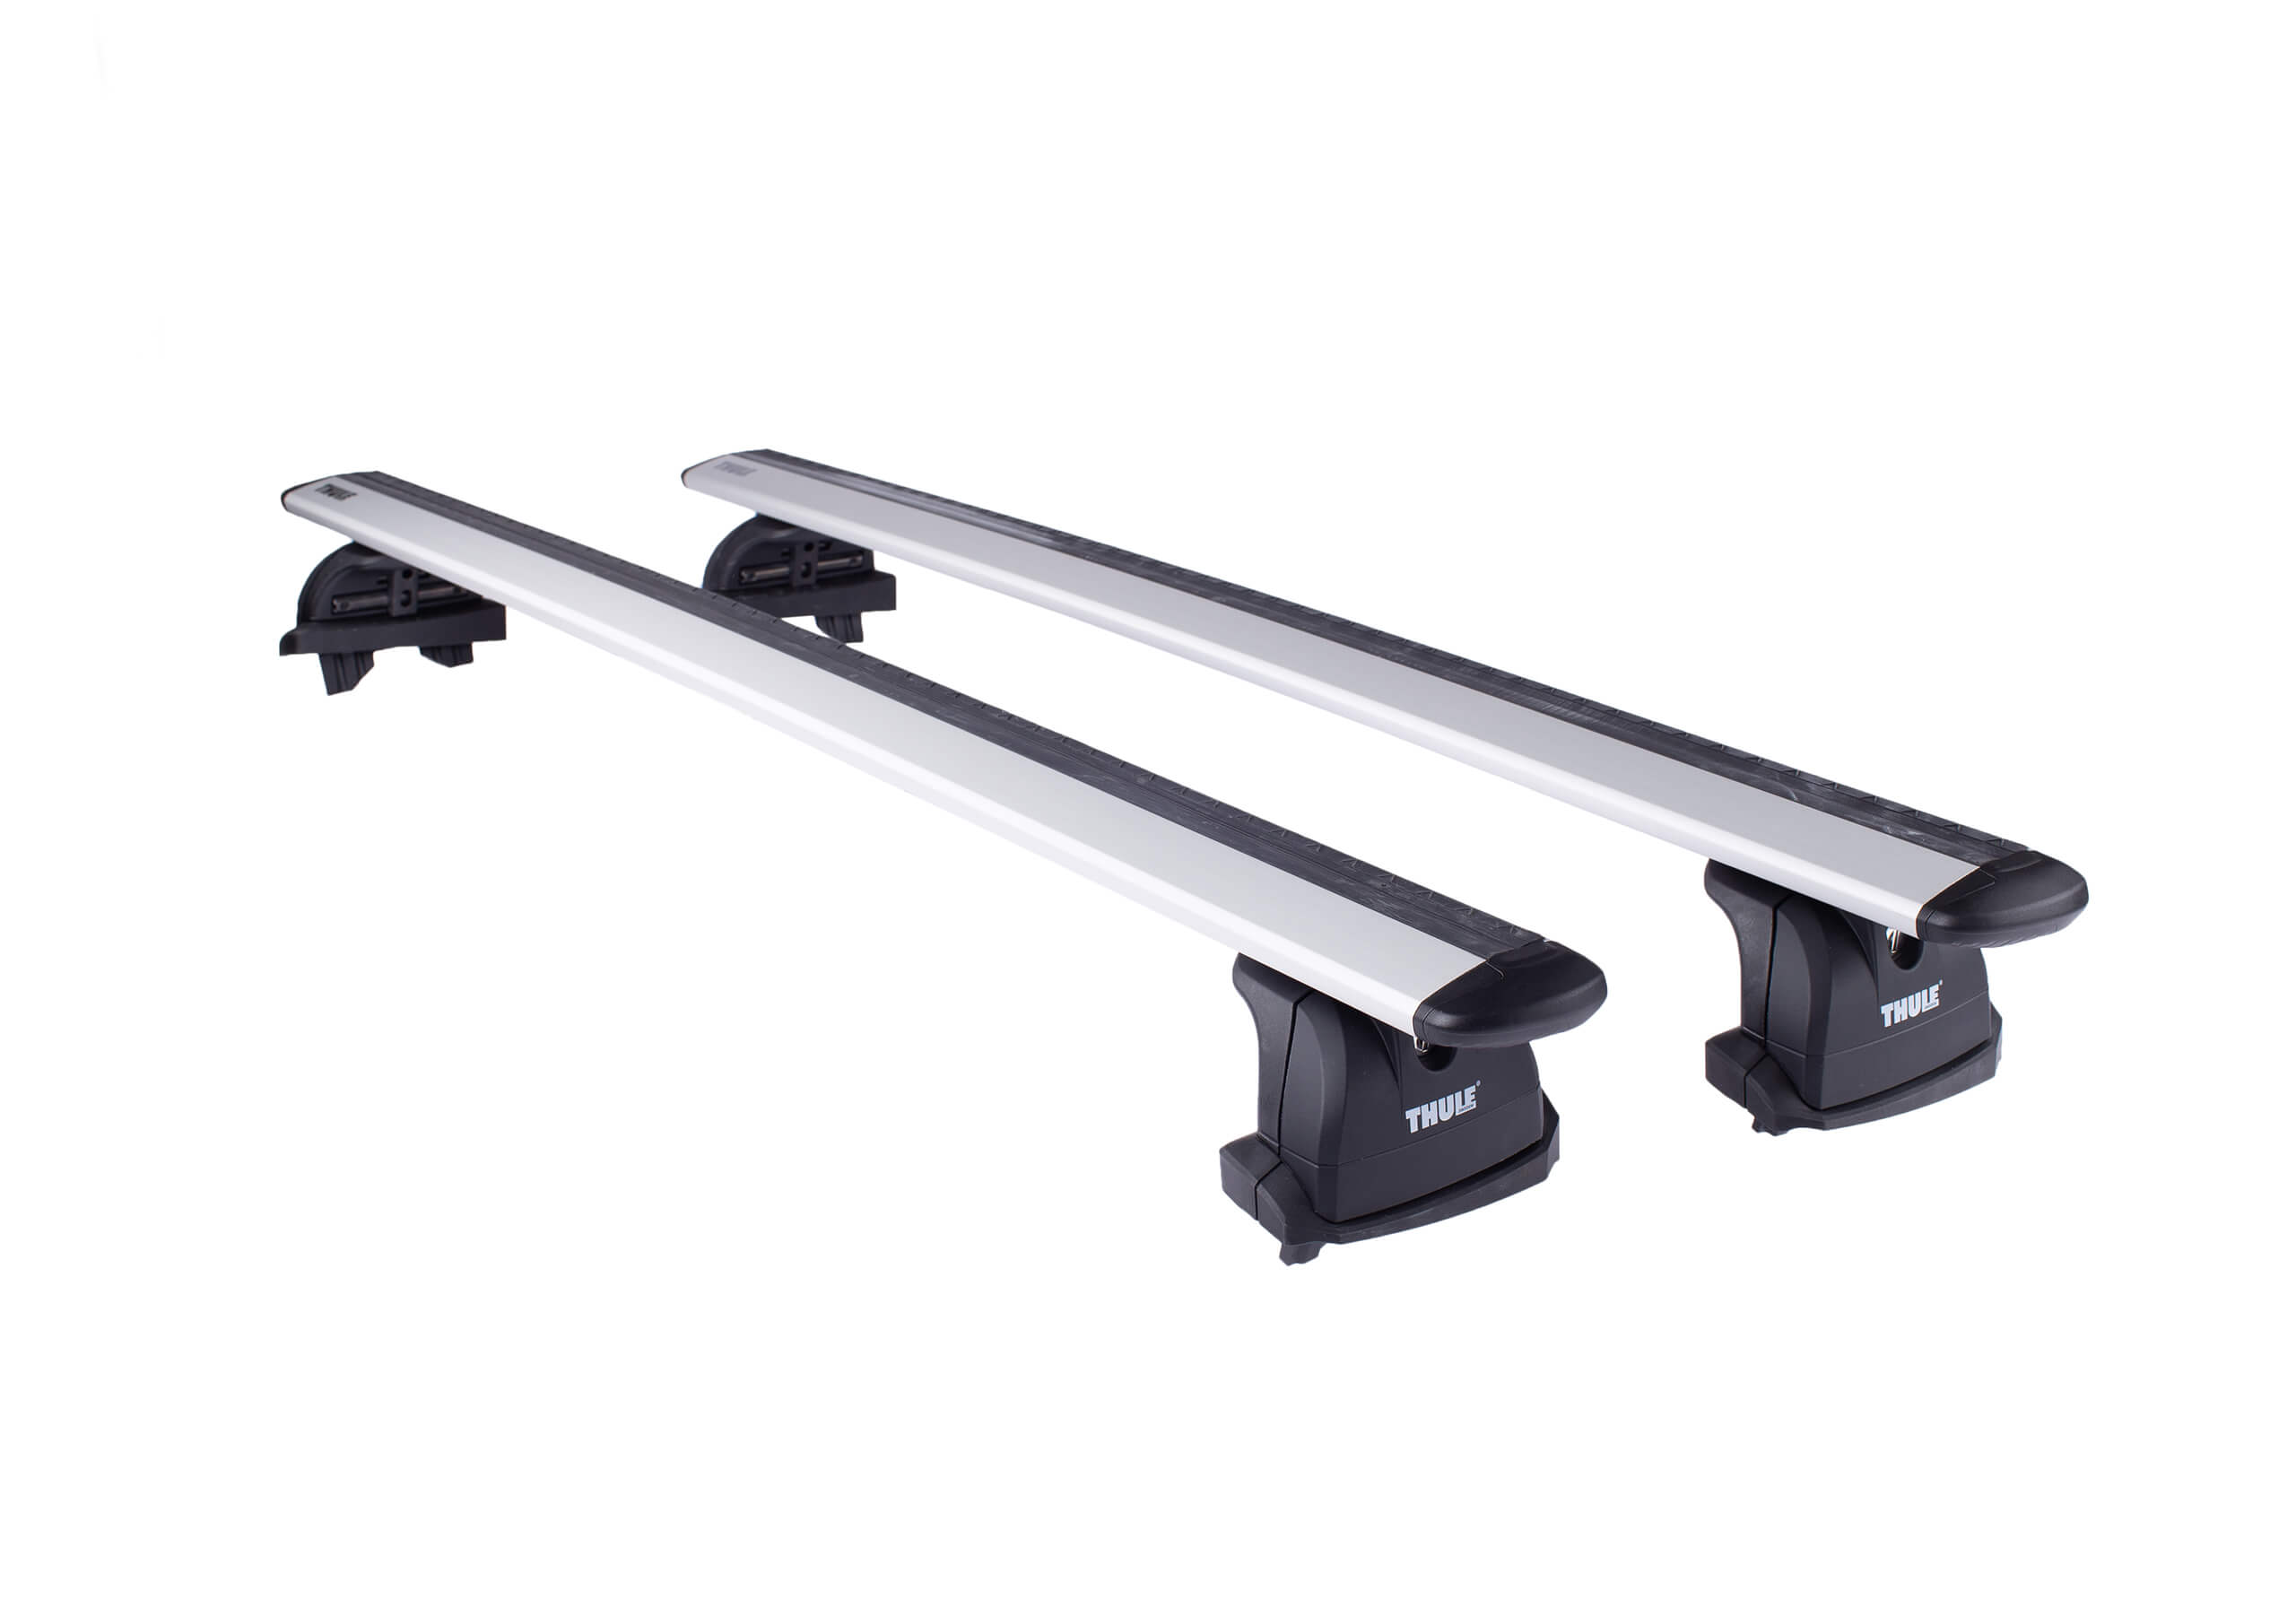 BMW 3 series Touring (2005 to 2010):Thule silver Evo WingBars package - 753, 7112, 3028